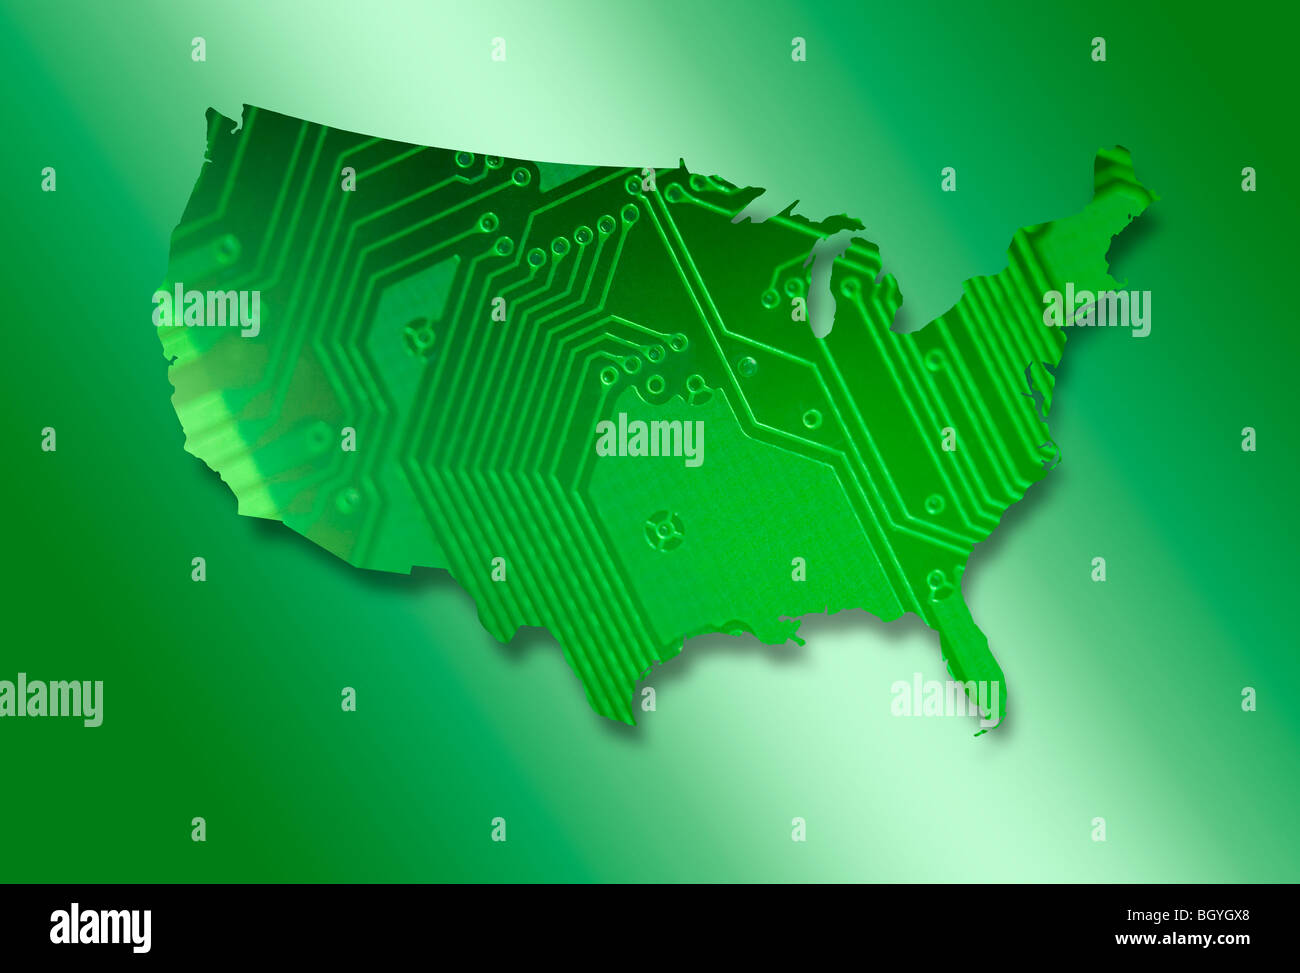 Circuit board in shape of United States of America Stock Photo